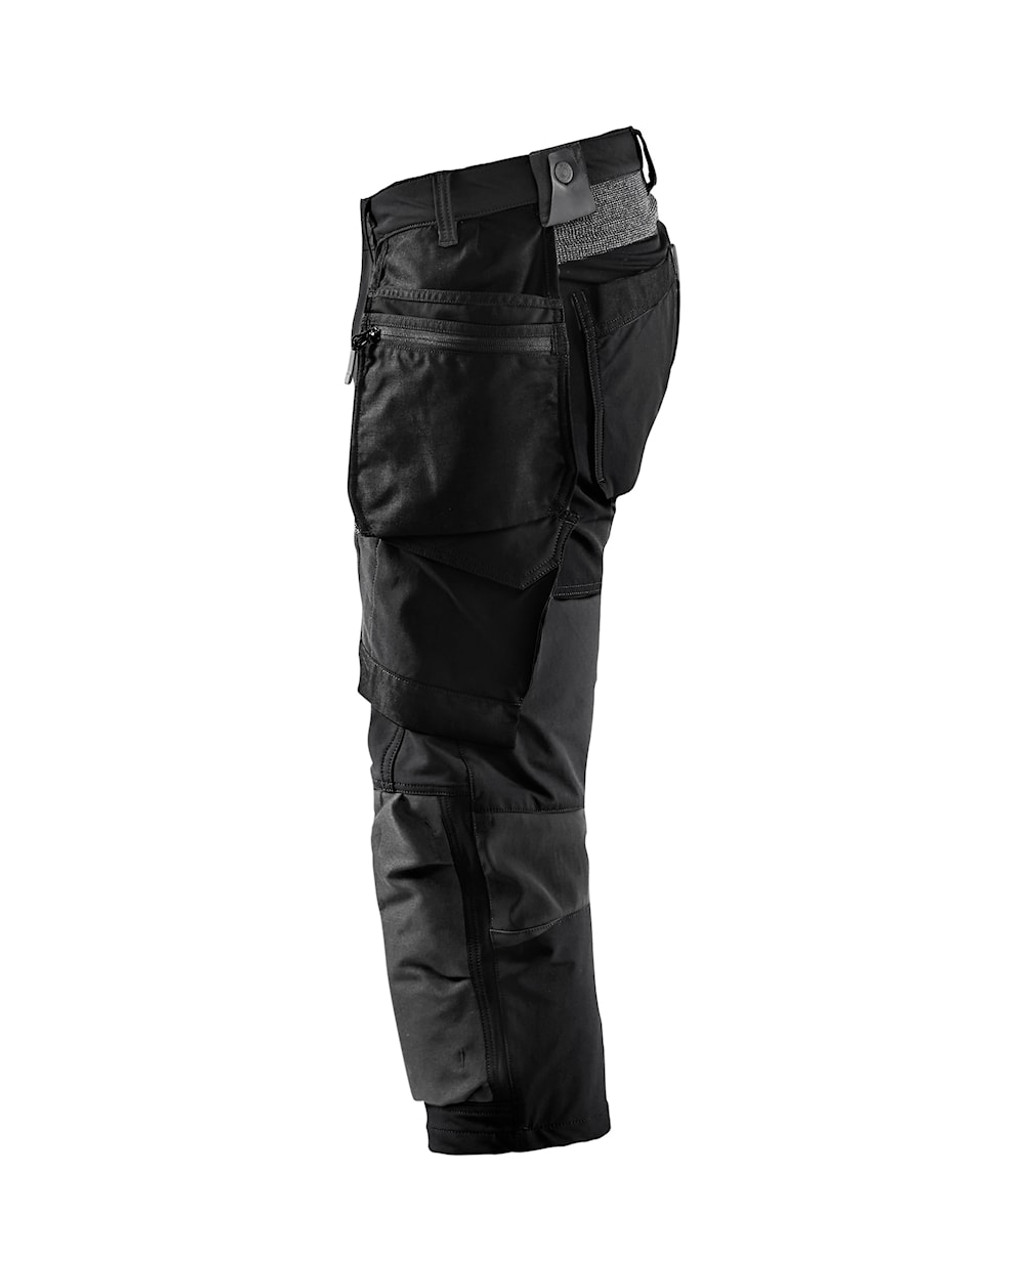 Buy online in Australia and New Zealand BLAKLADER Shorts 1521 with Kneepad Pockets  for Carpenters that have Holster Pockets